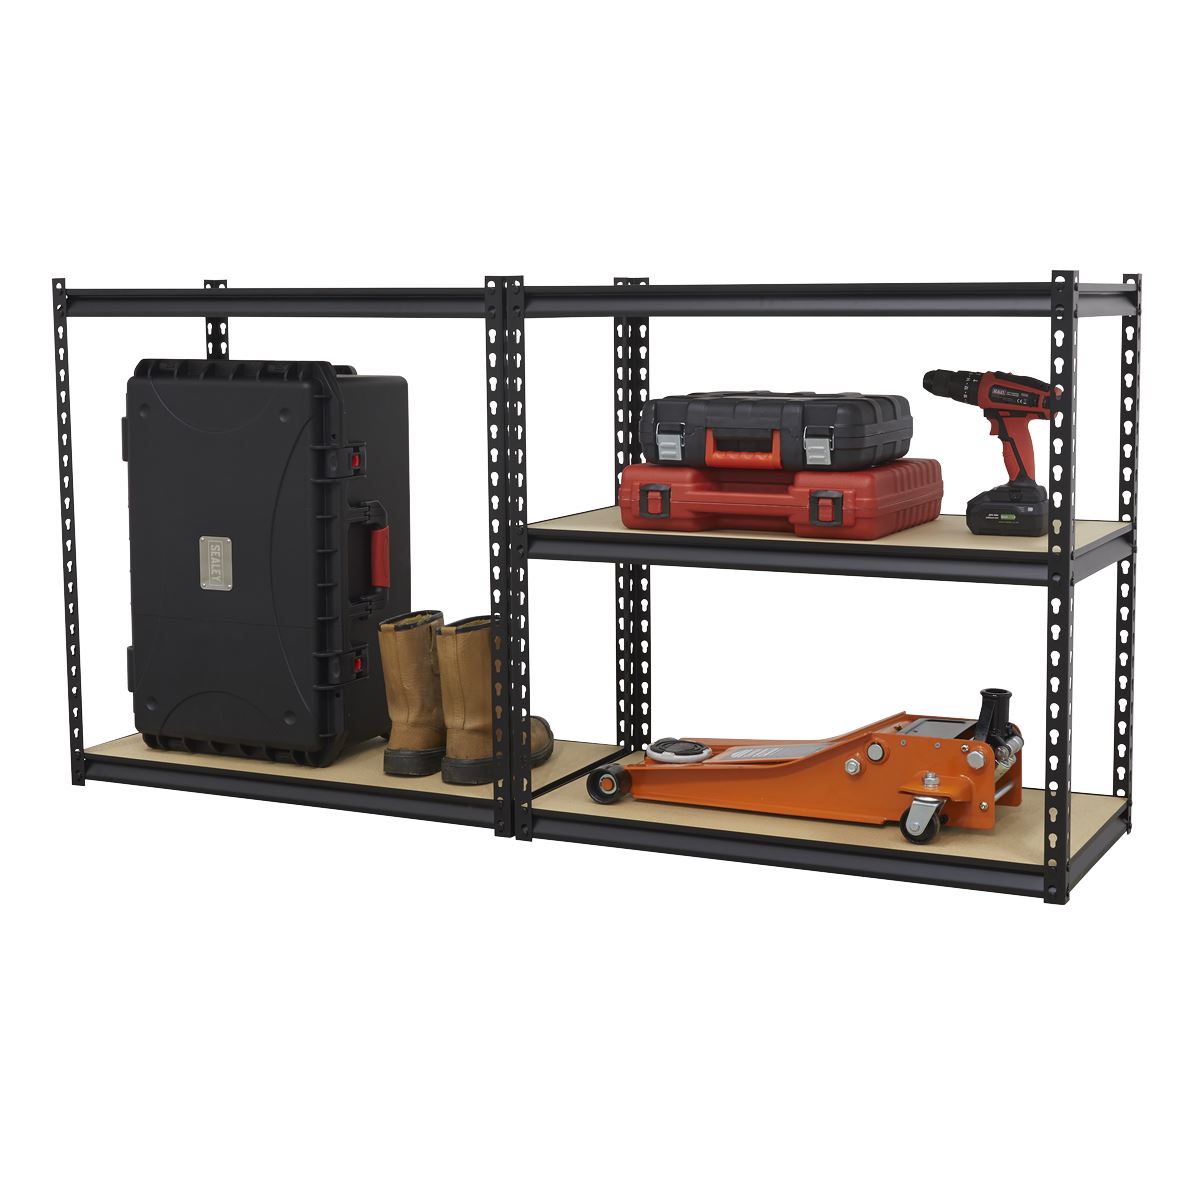 Sealey Racking Unit with 5 Shelves 340kg Capacity Per Level